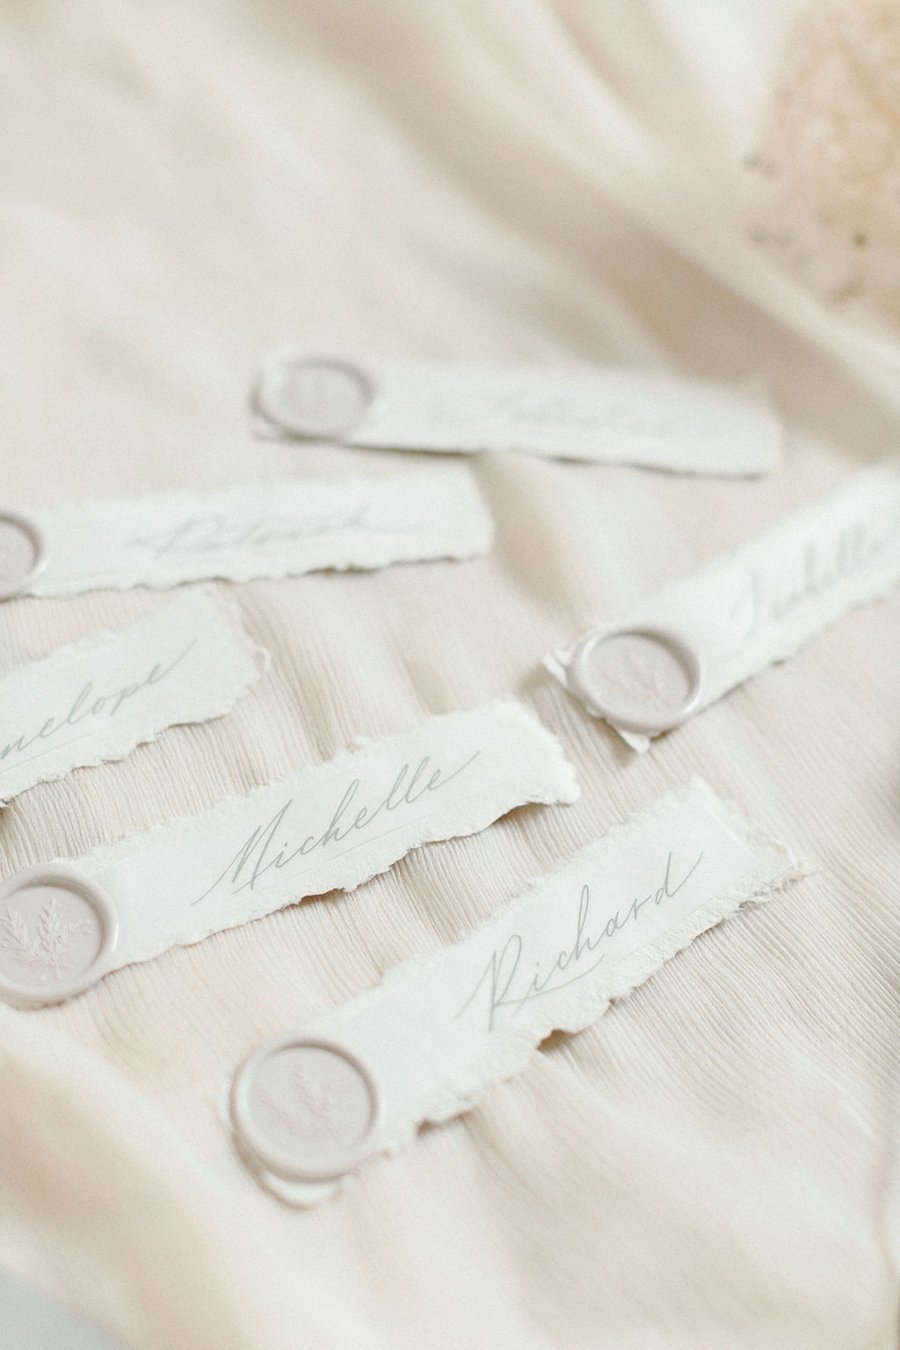 fine art wedding stationery for a wedding in tuscany by les anagnou wedding photographers